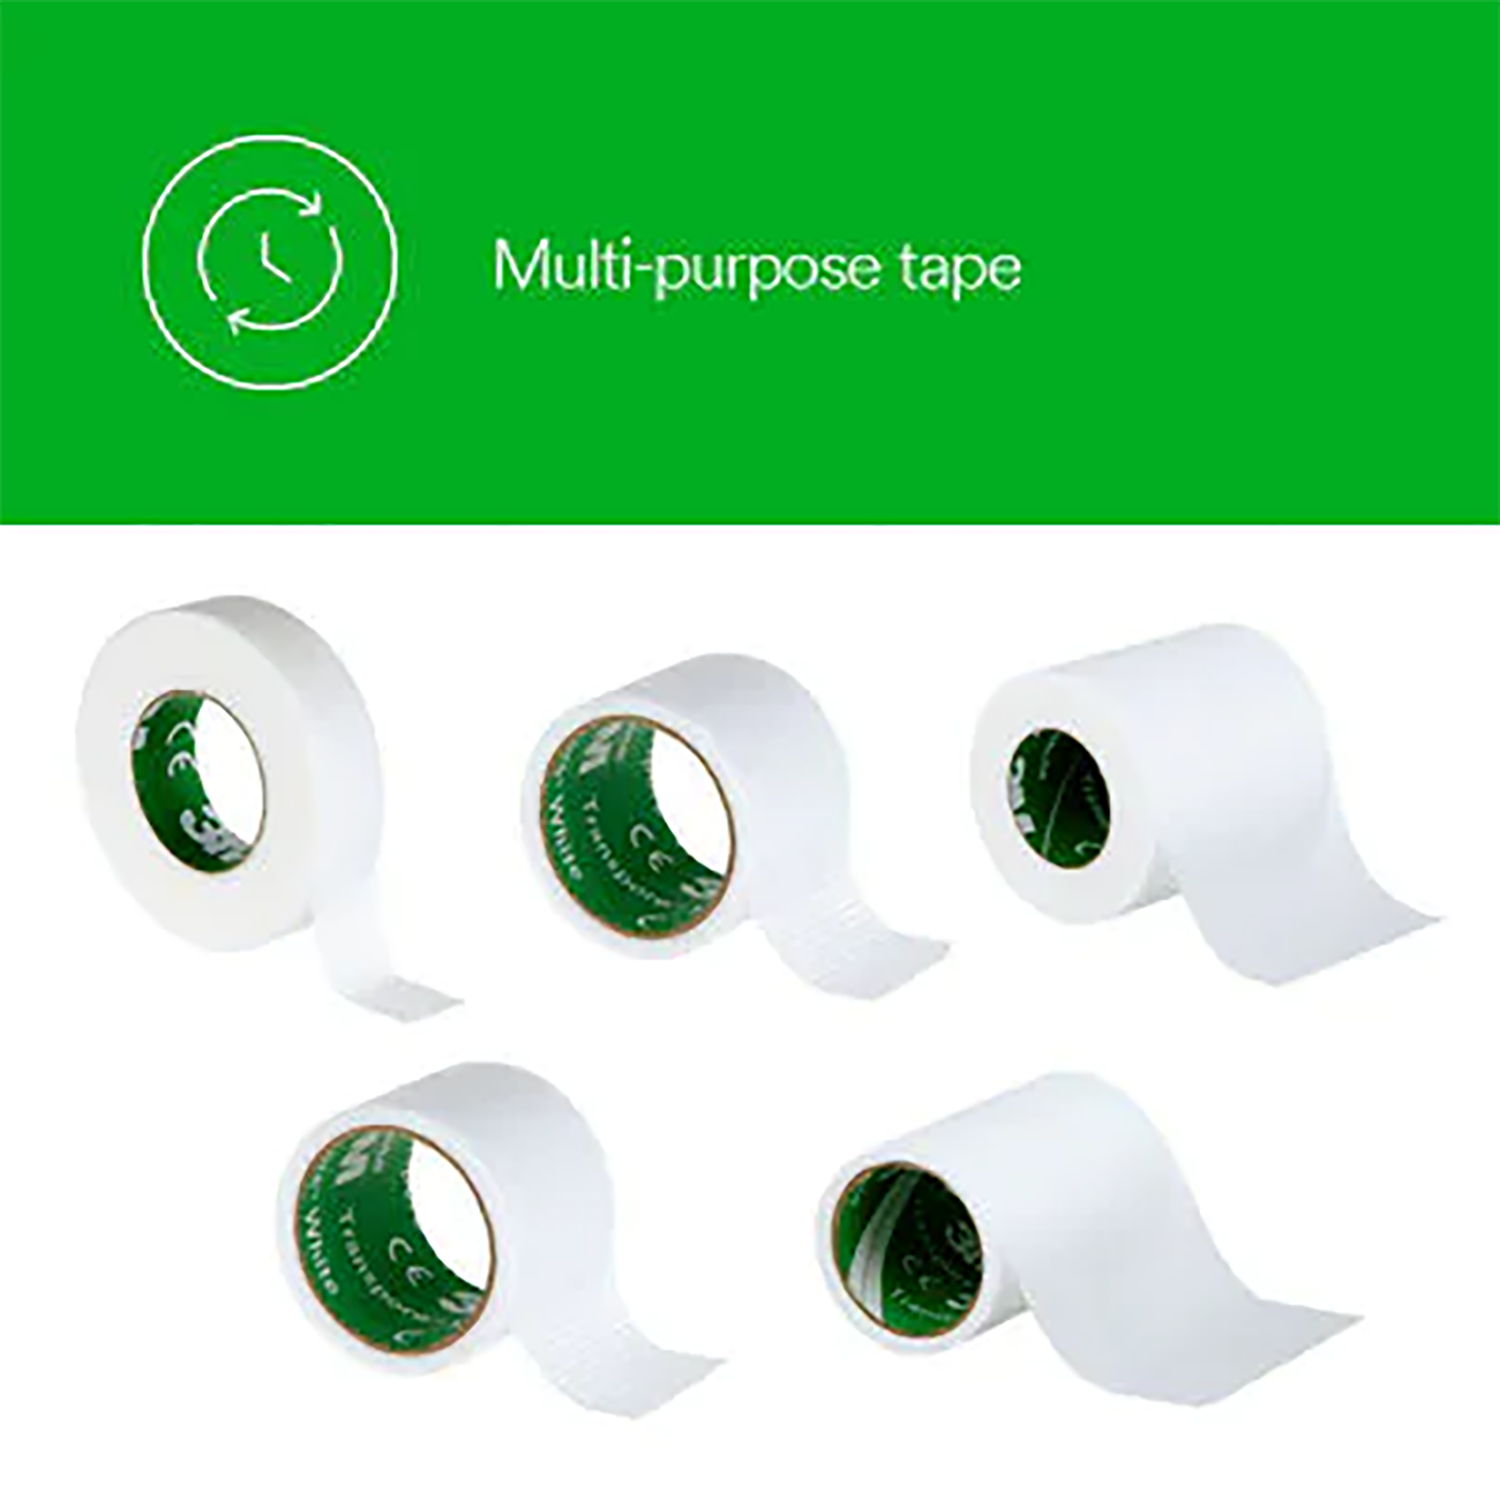 3M Transpore Surgical Tape (White) | 2.5cm x 9.1m | Pack of 12 Rolls (1)